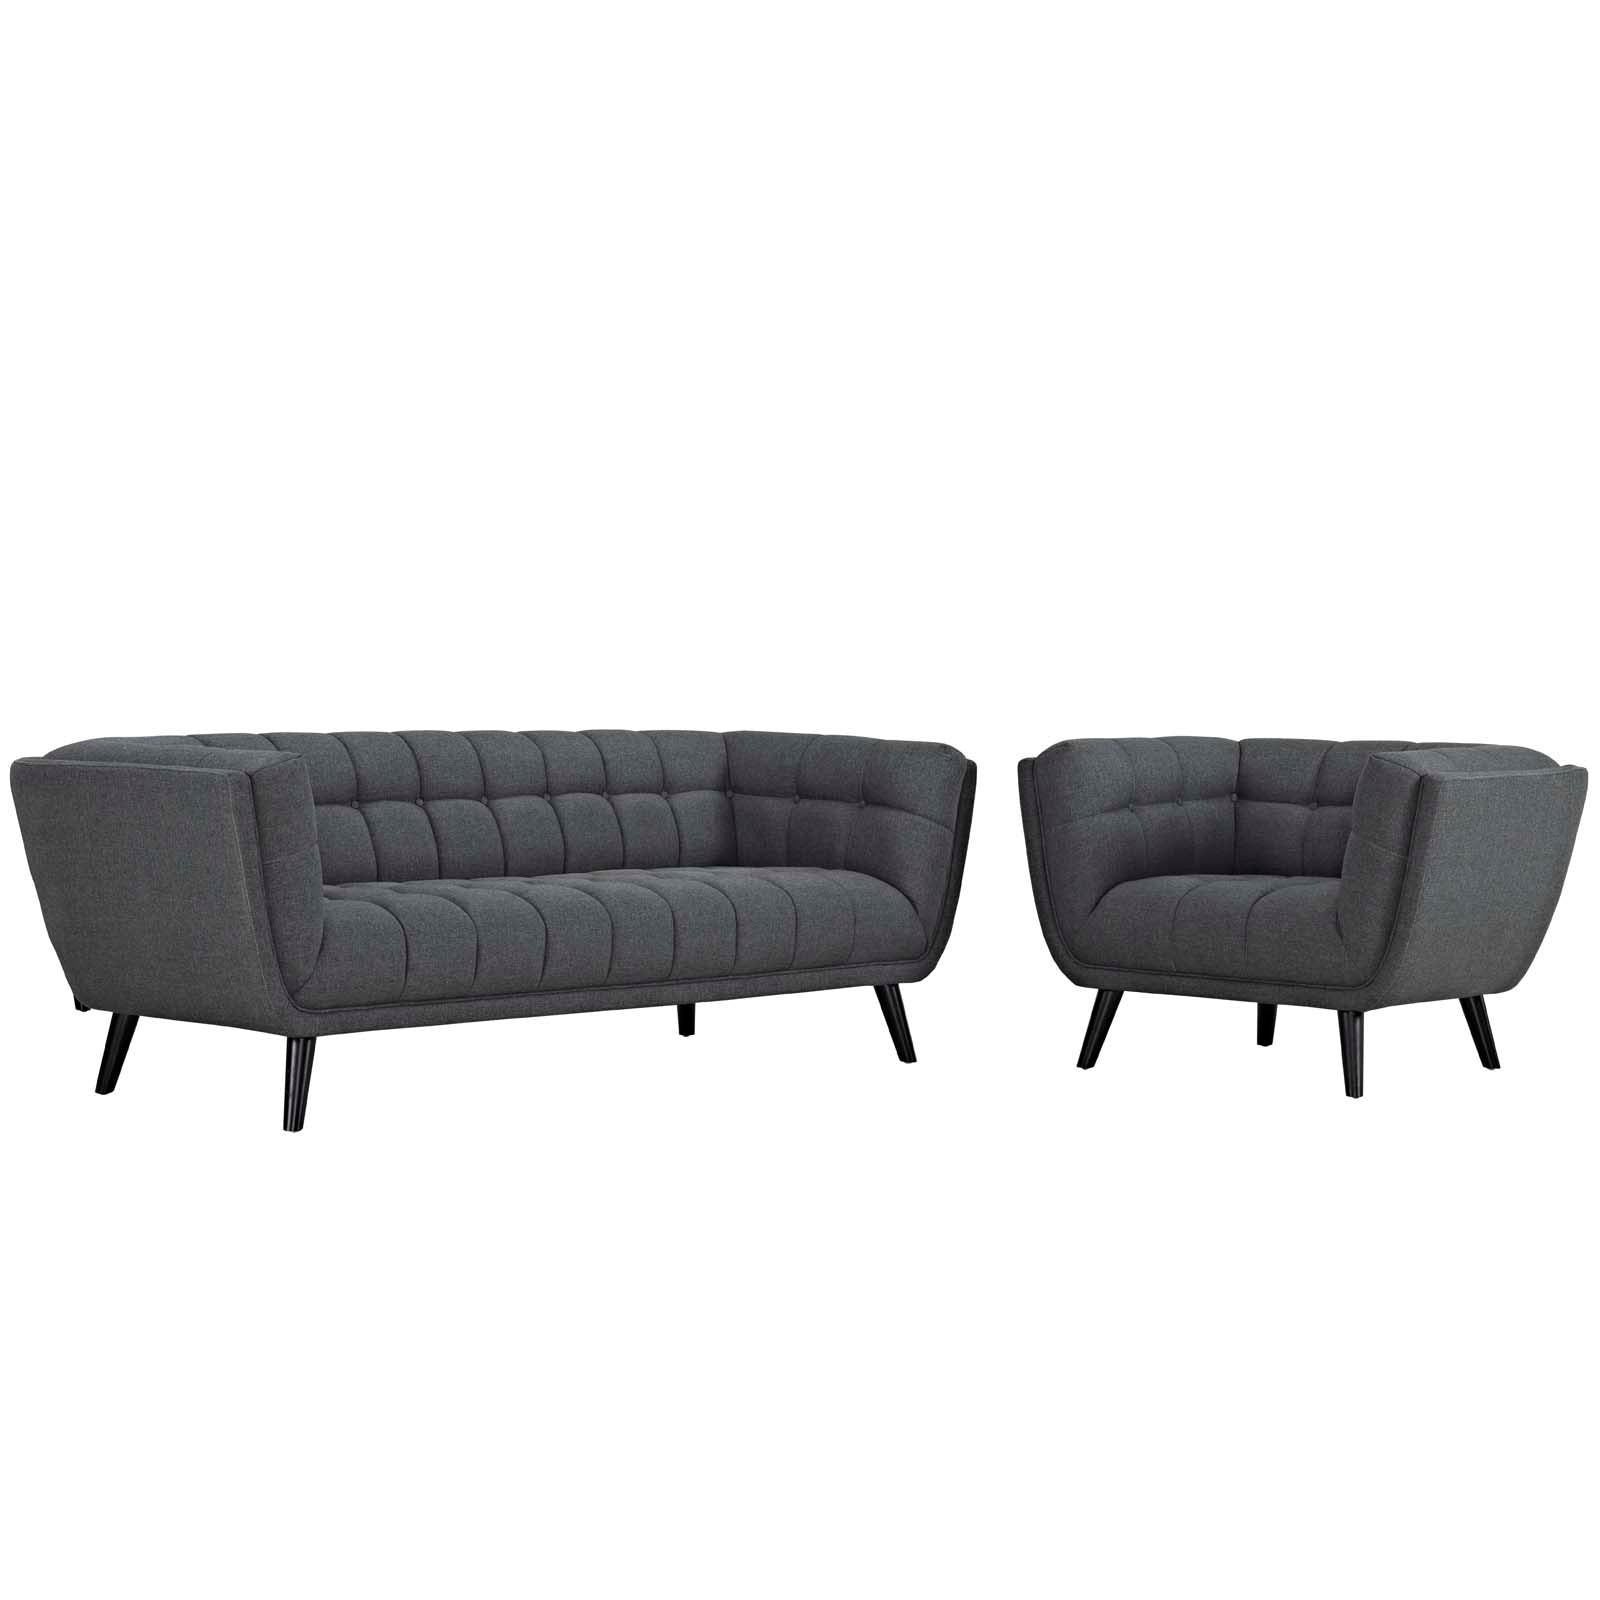 Bestow 2 Piece Upholstered Fabric Sofa and Armchair Set - East Shore Modern Home Furnishings